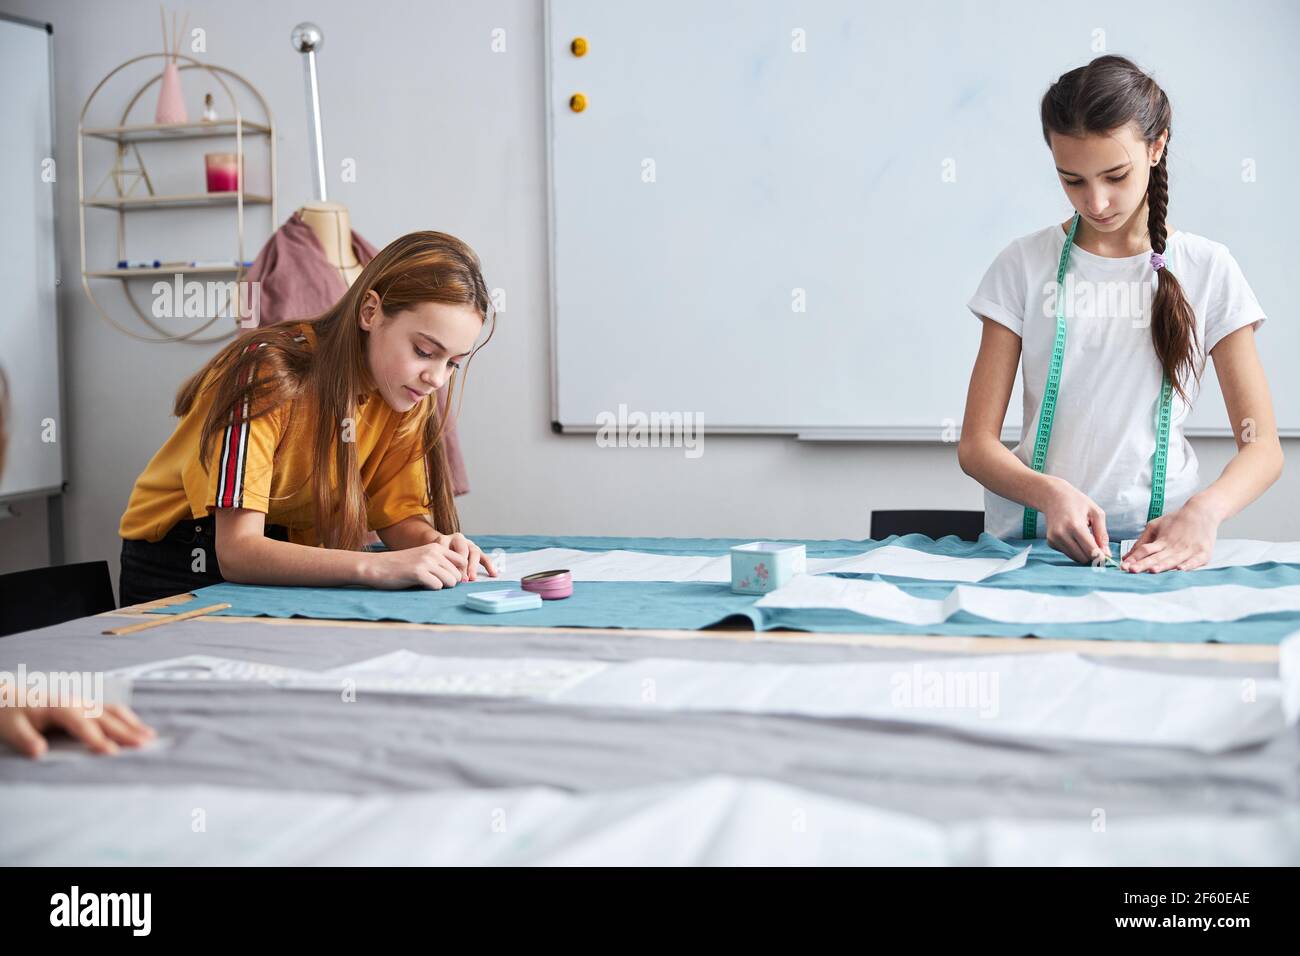 Adorable girls preparing fabric in sewing workshop Stock Photo